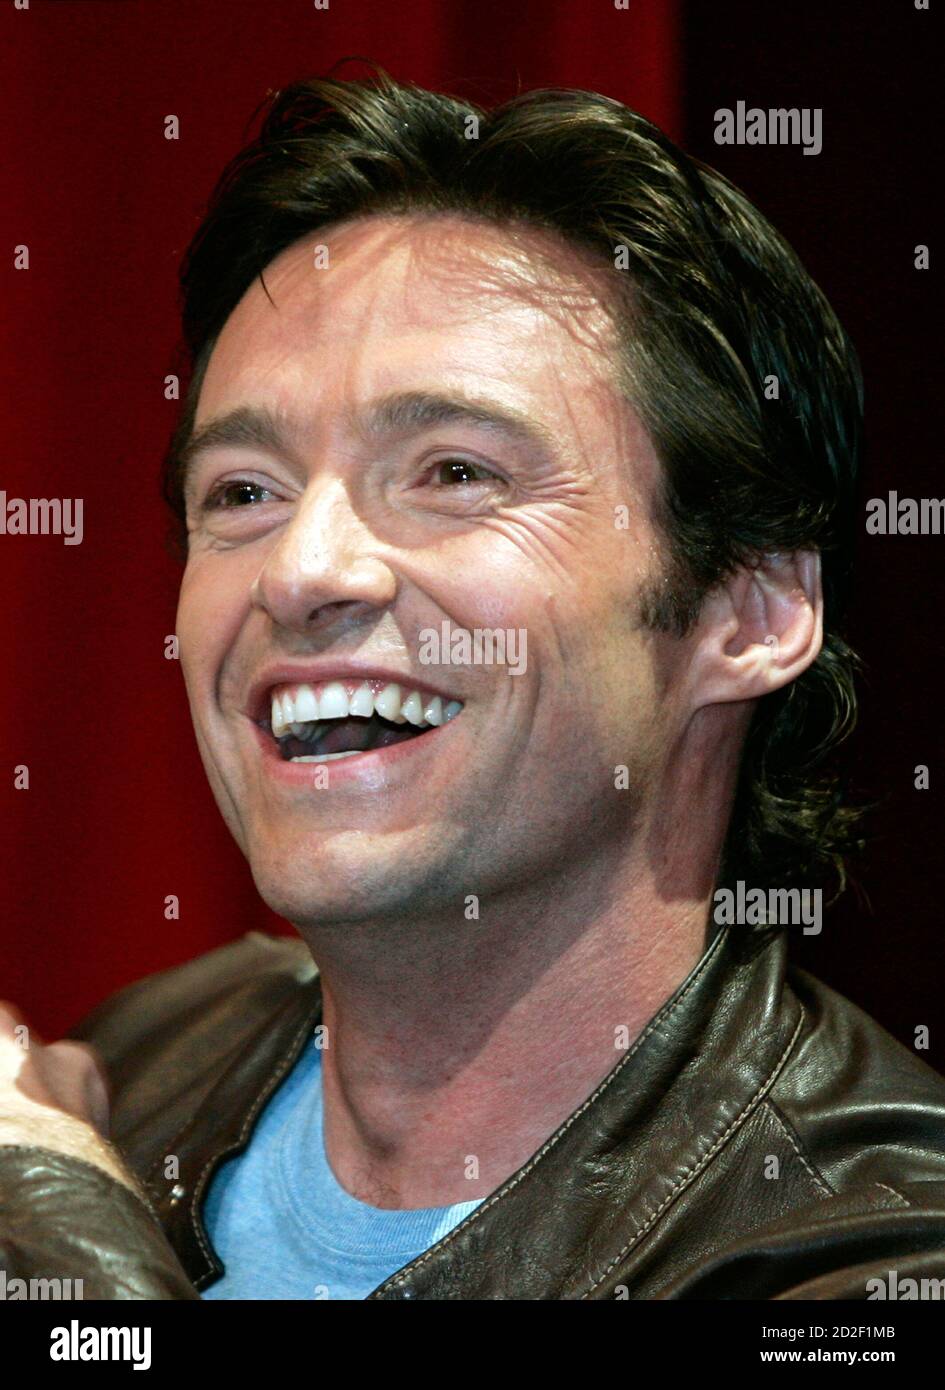 Australian Hugh Jackman, star of the Broadway hit musical "The Boy from  Oz", reacts during a news conference in Sydney February 13, 2006. Jackman  joined part of the cast and producers to